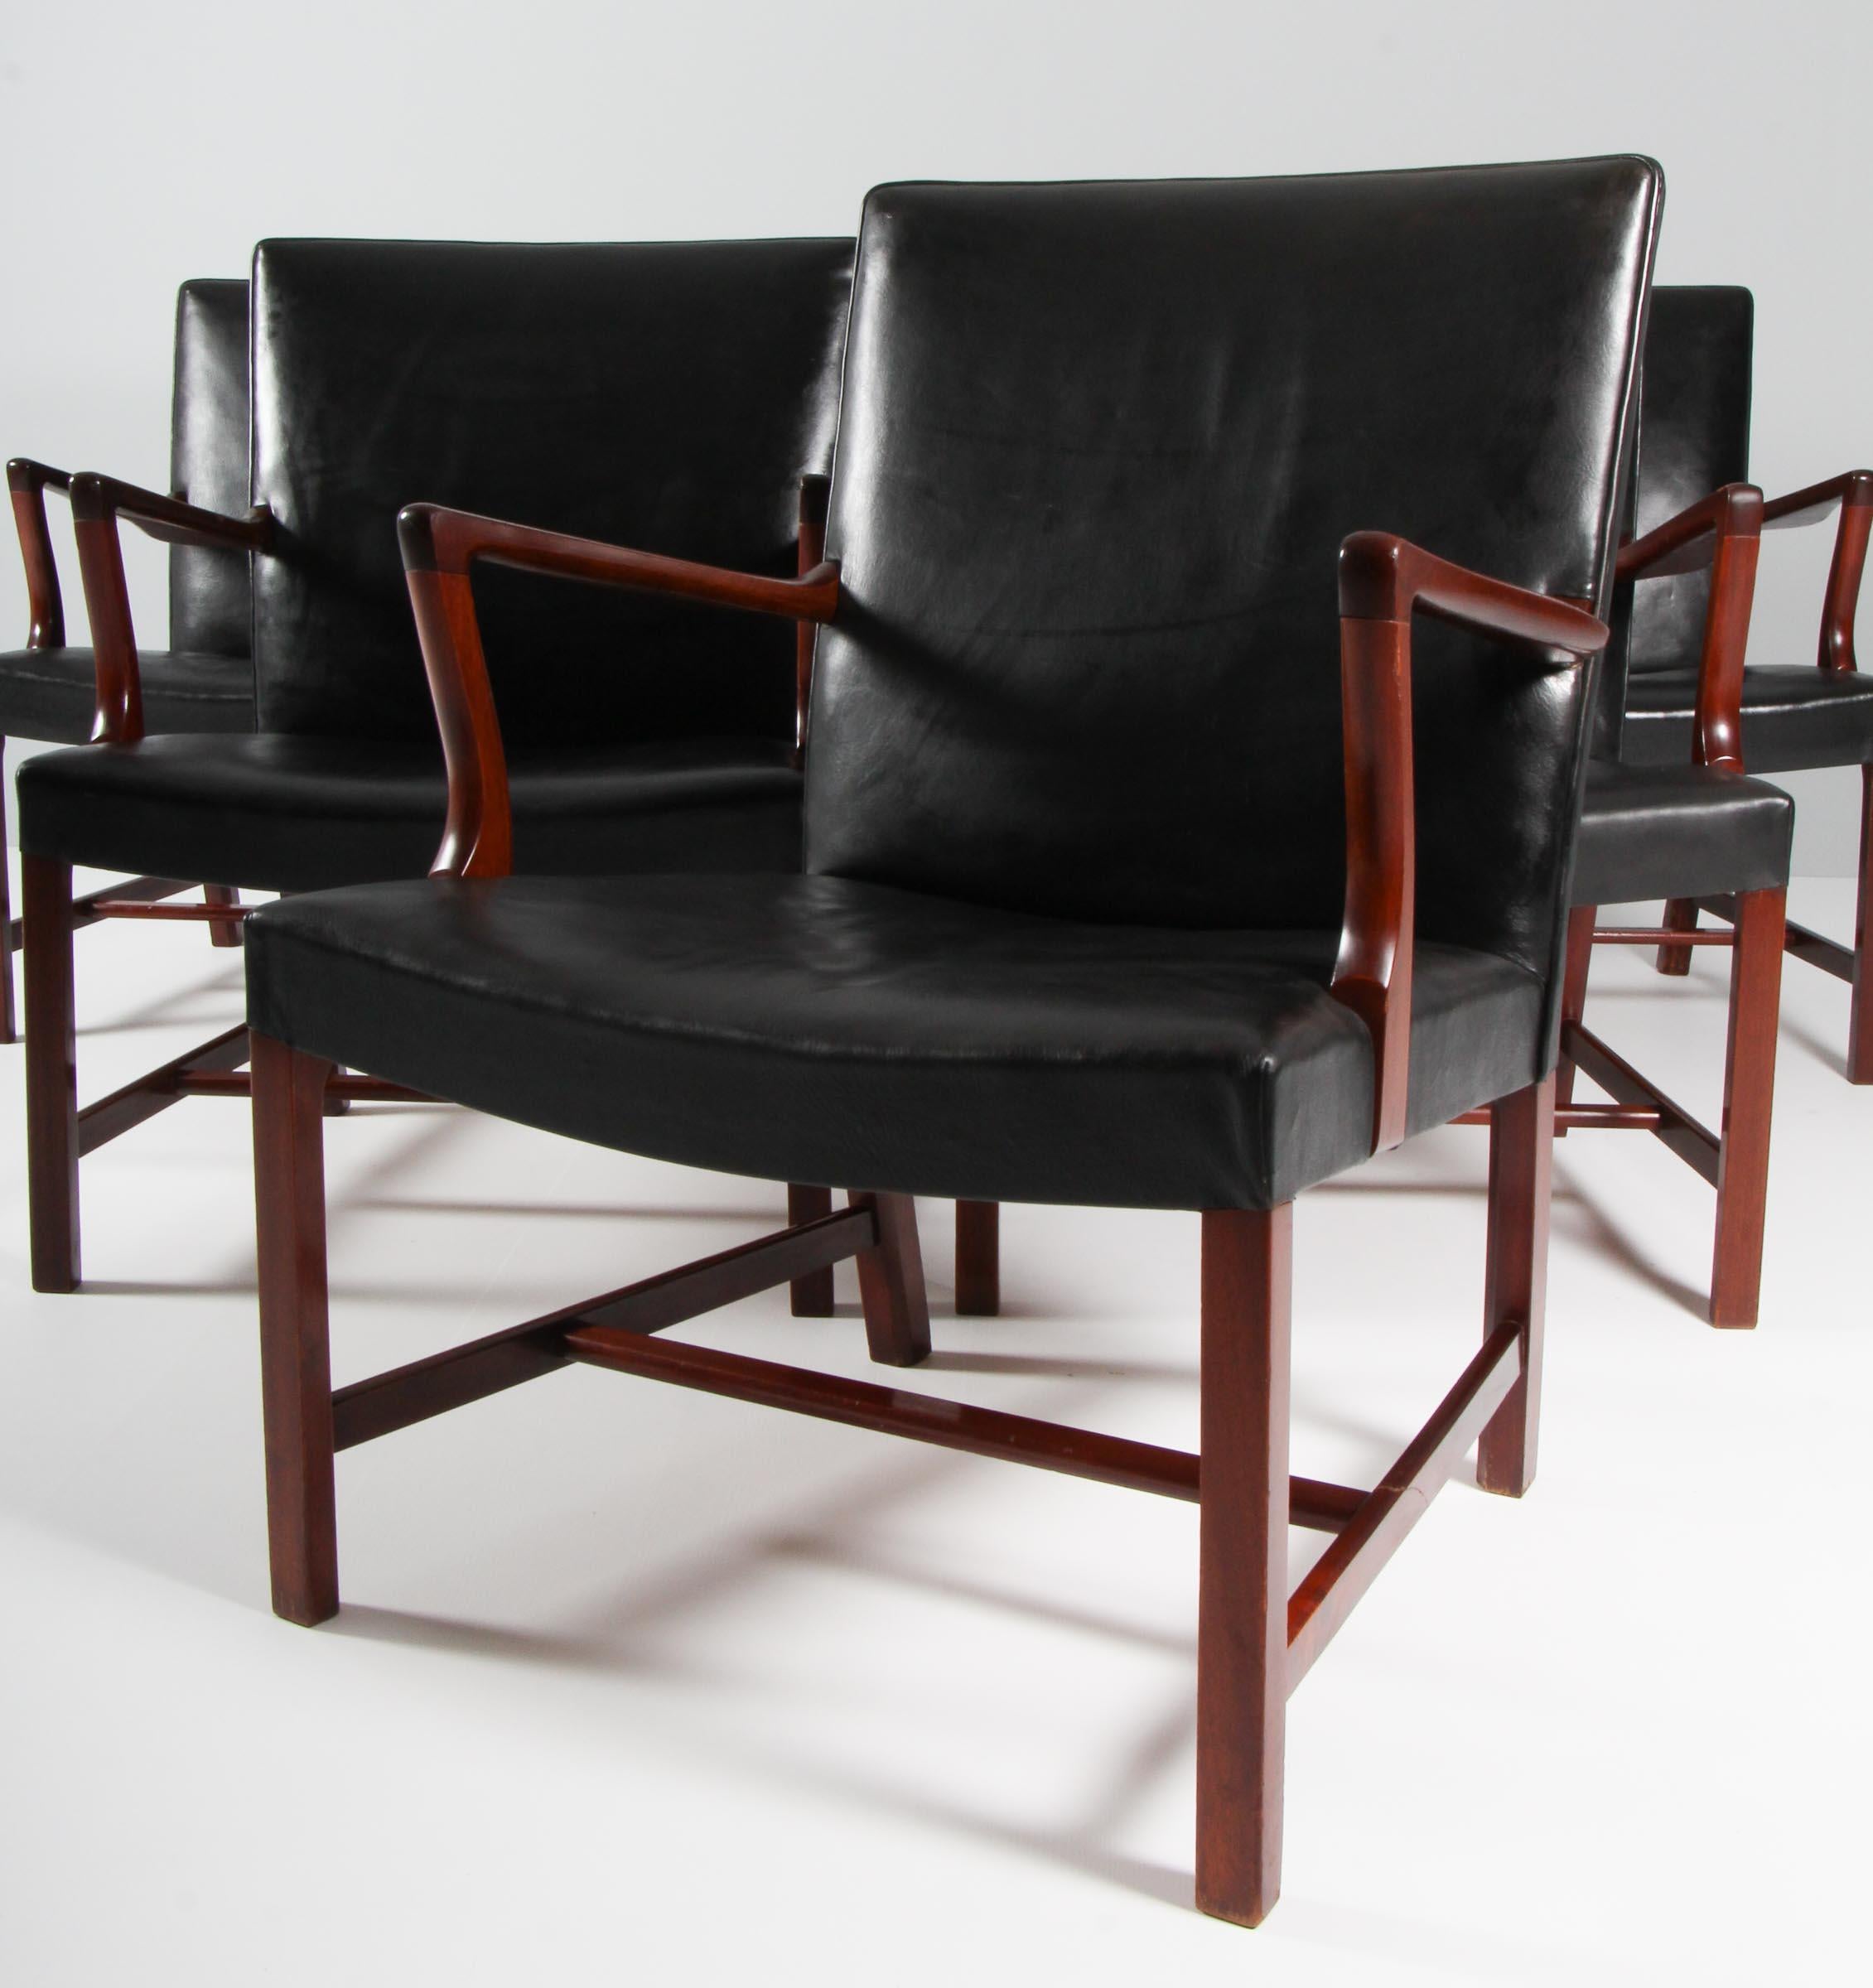 Scandinavian Modern Hans J. Wegner Early Set of Six Arm Chairs in Mahogany and Leather, 1950s